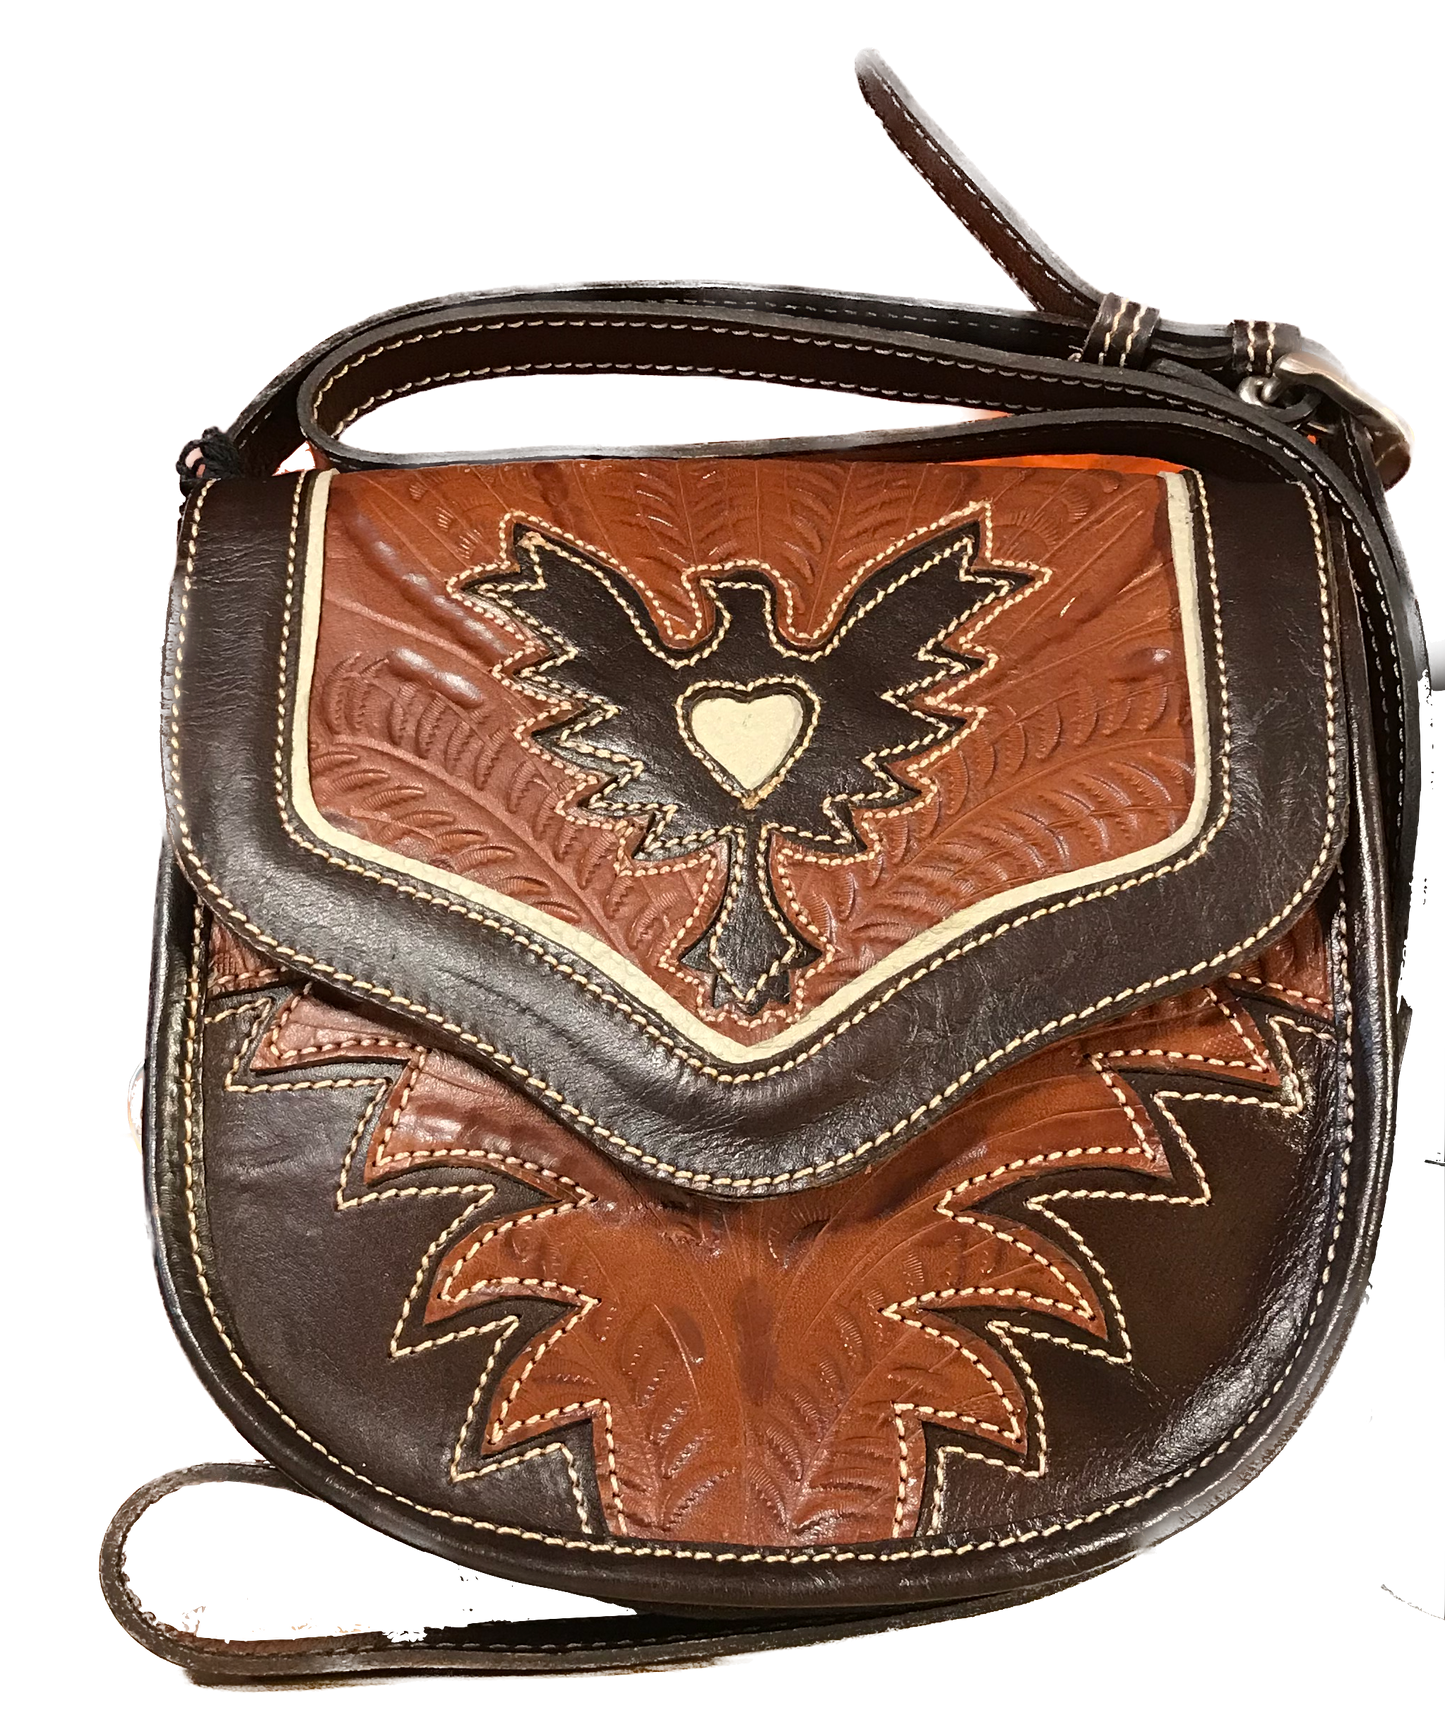 Antique Brown and Chocolate Brown Leather Crossbody Flap Bag with Eagle Cutout